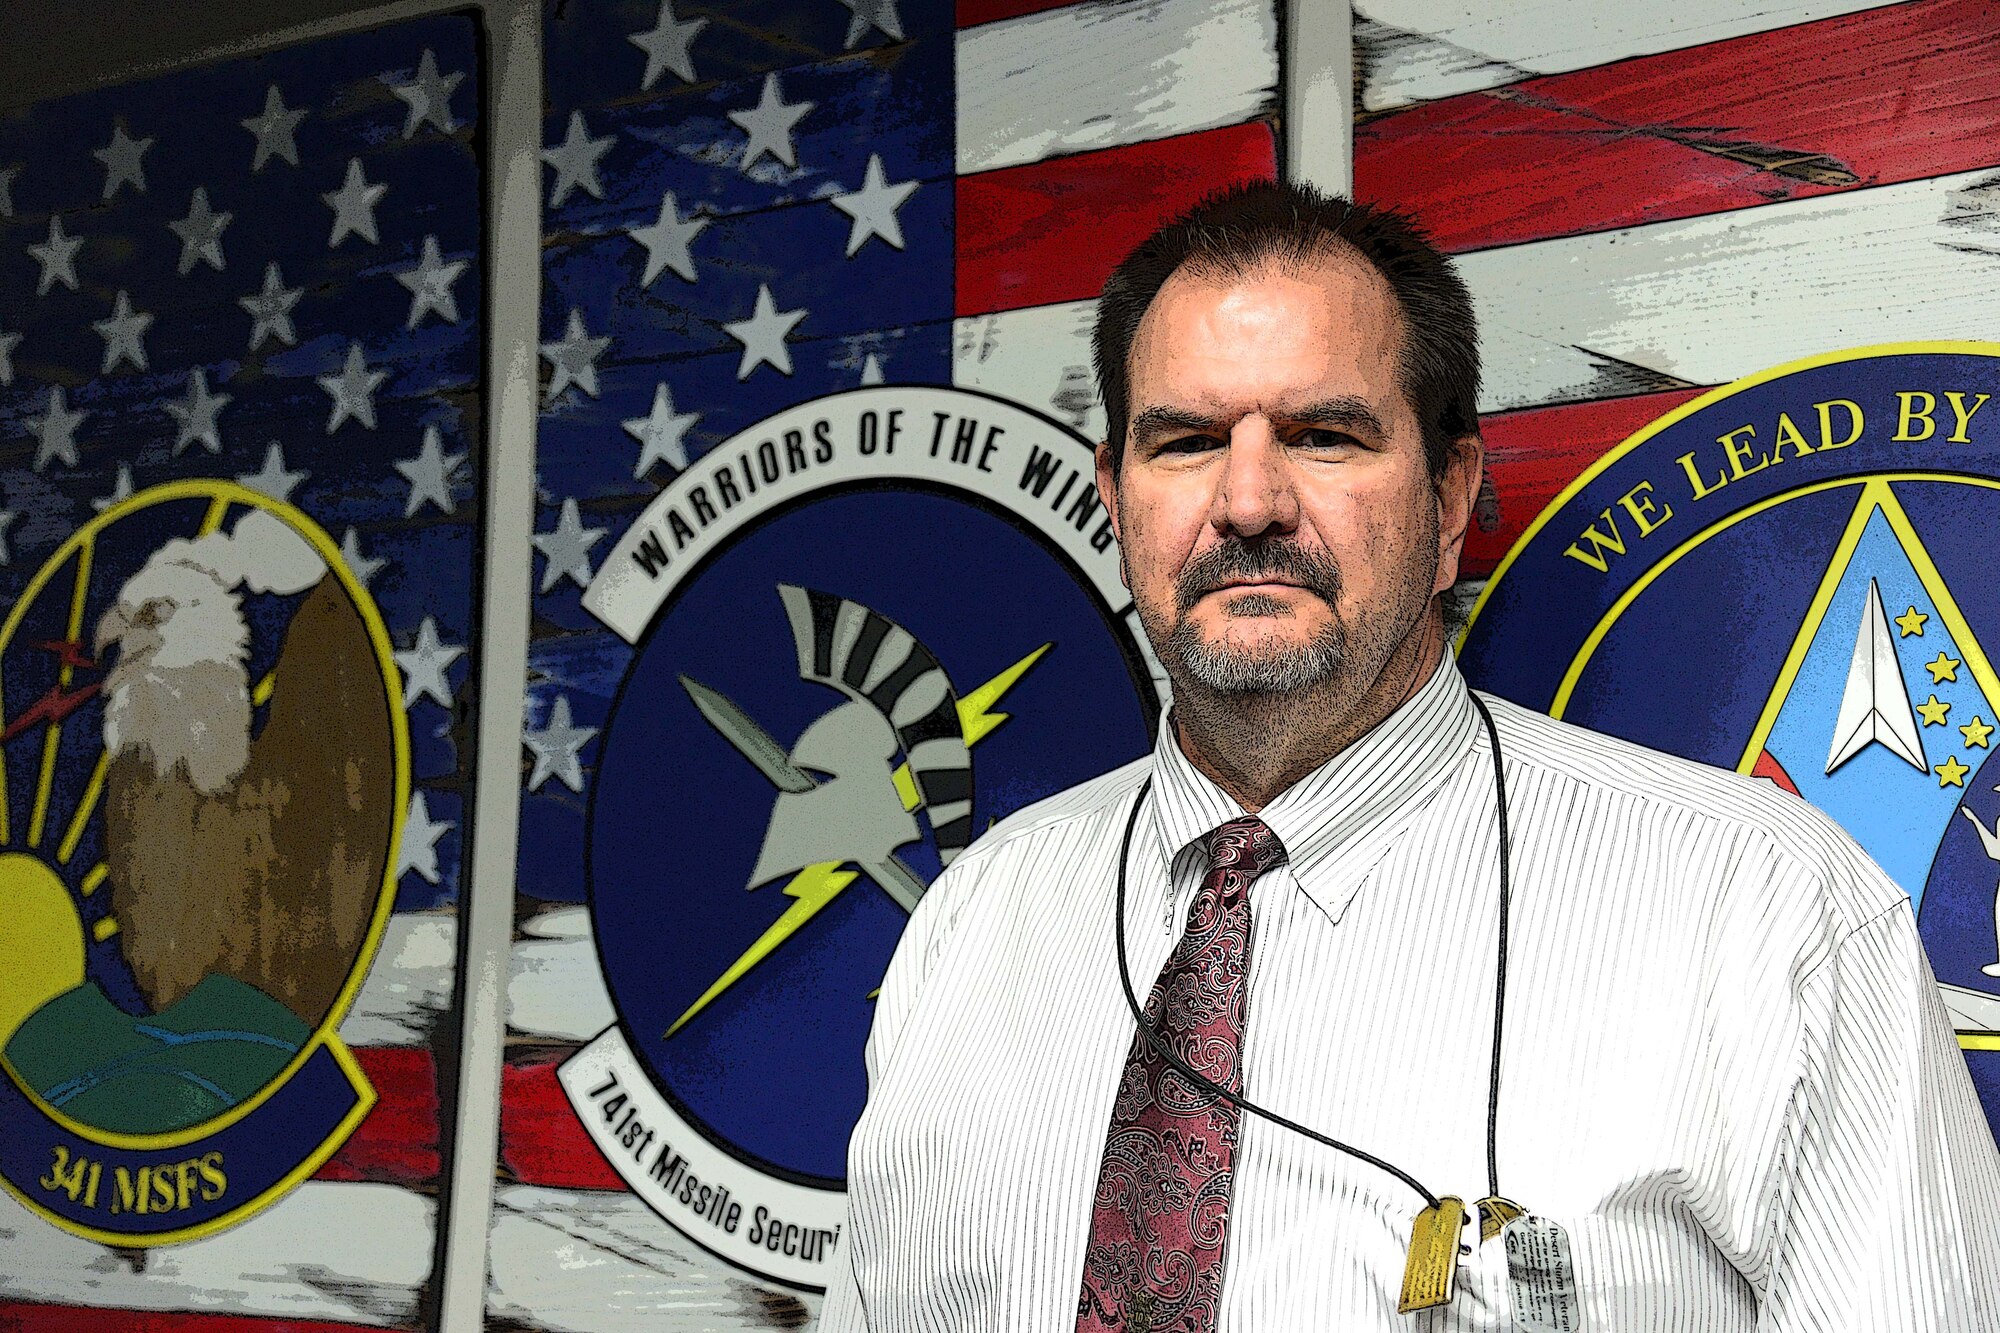 Stan Moody, 341st Security Forces Group plans and projects manager, poses for a photo Nov. 2, 2016, at Malmstrom Air Force Base, Mont. Moody has been the plans and projects manager at Malmstrom for the past five years, is passionate about his job and recently received the Civilian Category II Supervisory Award for the third quarter at the wing level. (U.S. Air Force photo/Airman 1st Class Magen M. Reeves)